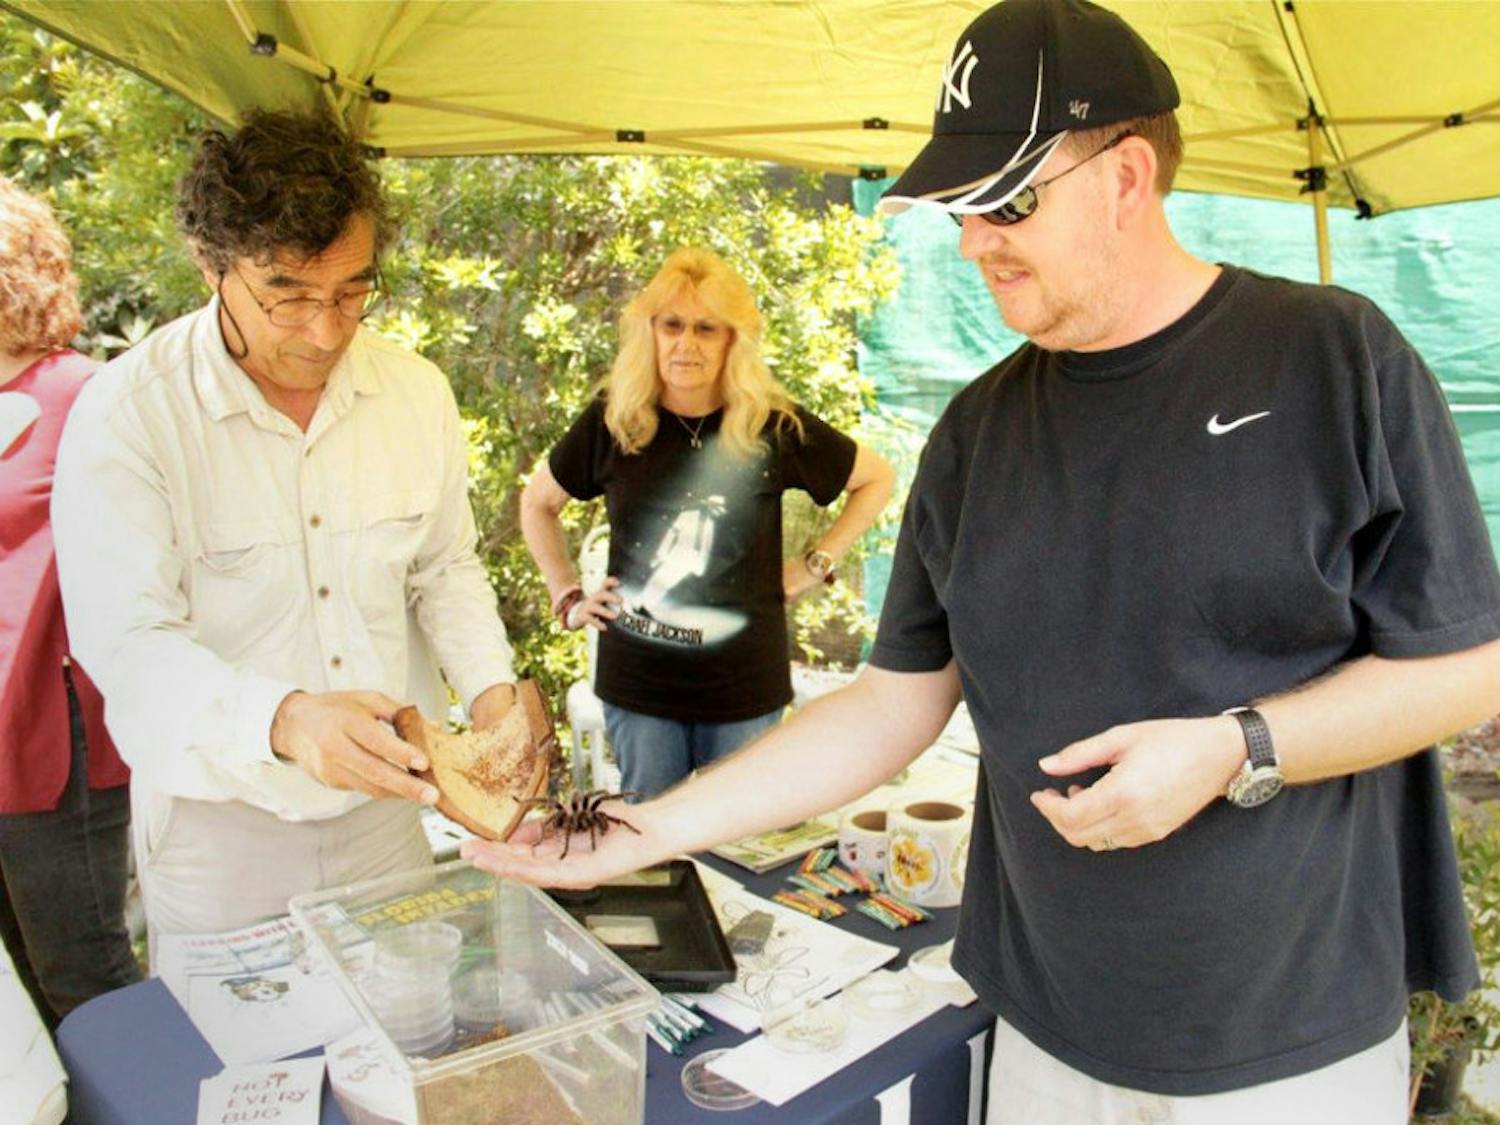 Dr. Joe Cicero, a UF research scientist, hands a tarantula to attendee Mark Xby in the booth for the UF Entomology and Nematology Outreach Program during the Endangered Species Awareness Day at the Lubee Bat Conservancy on Saturday. It was the first time Xby had held a tarantula.